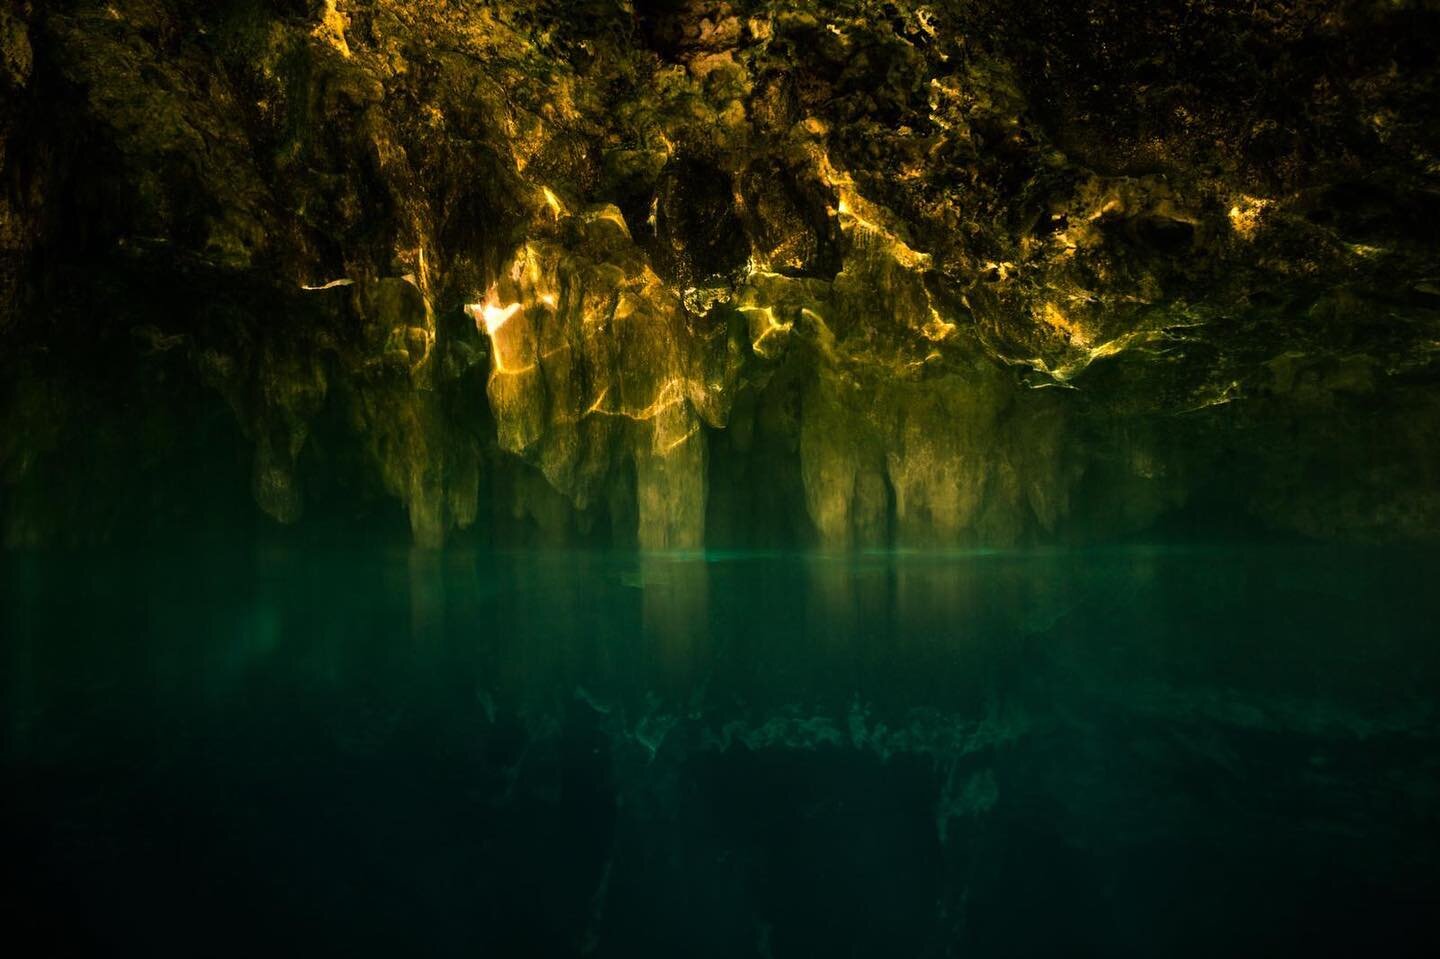 If, like me, you are a subpar swimmer and have an irrational fear of water, Gran Cenote is a must-see for your next visit to Tulum. ⁣
⁣
&ldquo;𝘎𝘳𝘢𝘯 𝘊𝘦𝘯𝘰𝘵𝘦 - 𝘦𝘭 𝘭𝘶𝘨𝘢𝘳 𝘮&aacute;𝘴 𝘩𝘦𝘳𝘮𝘰𝘴𝘰 𝘱𝘢𝘳𝘢 𝘢𝘩𝘰𝘨𝘢𝘳𝘴𝘦&rdquo;⁣ #eart